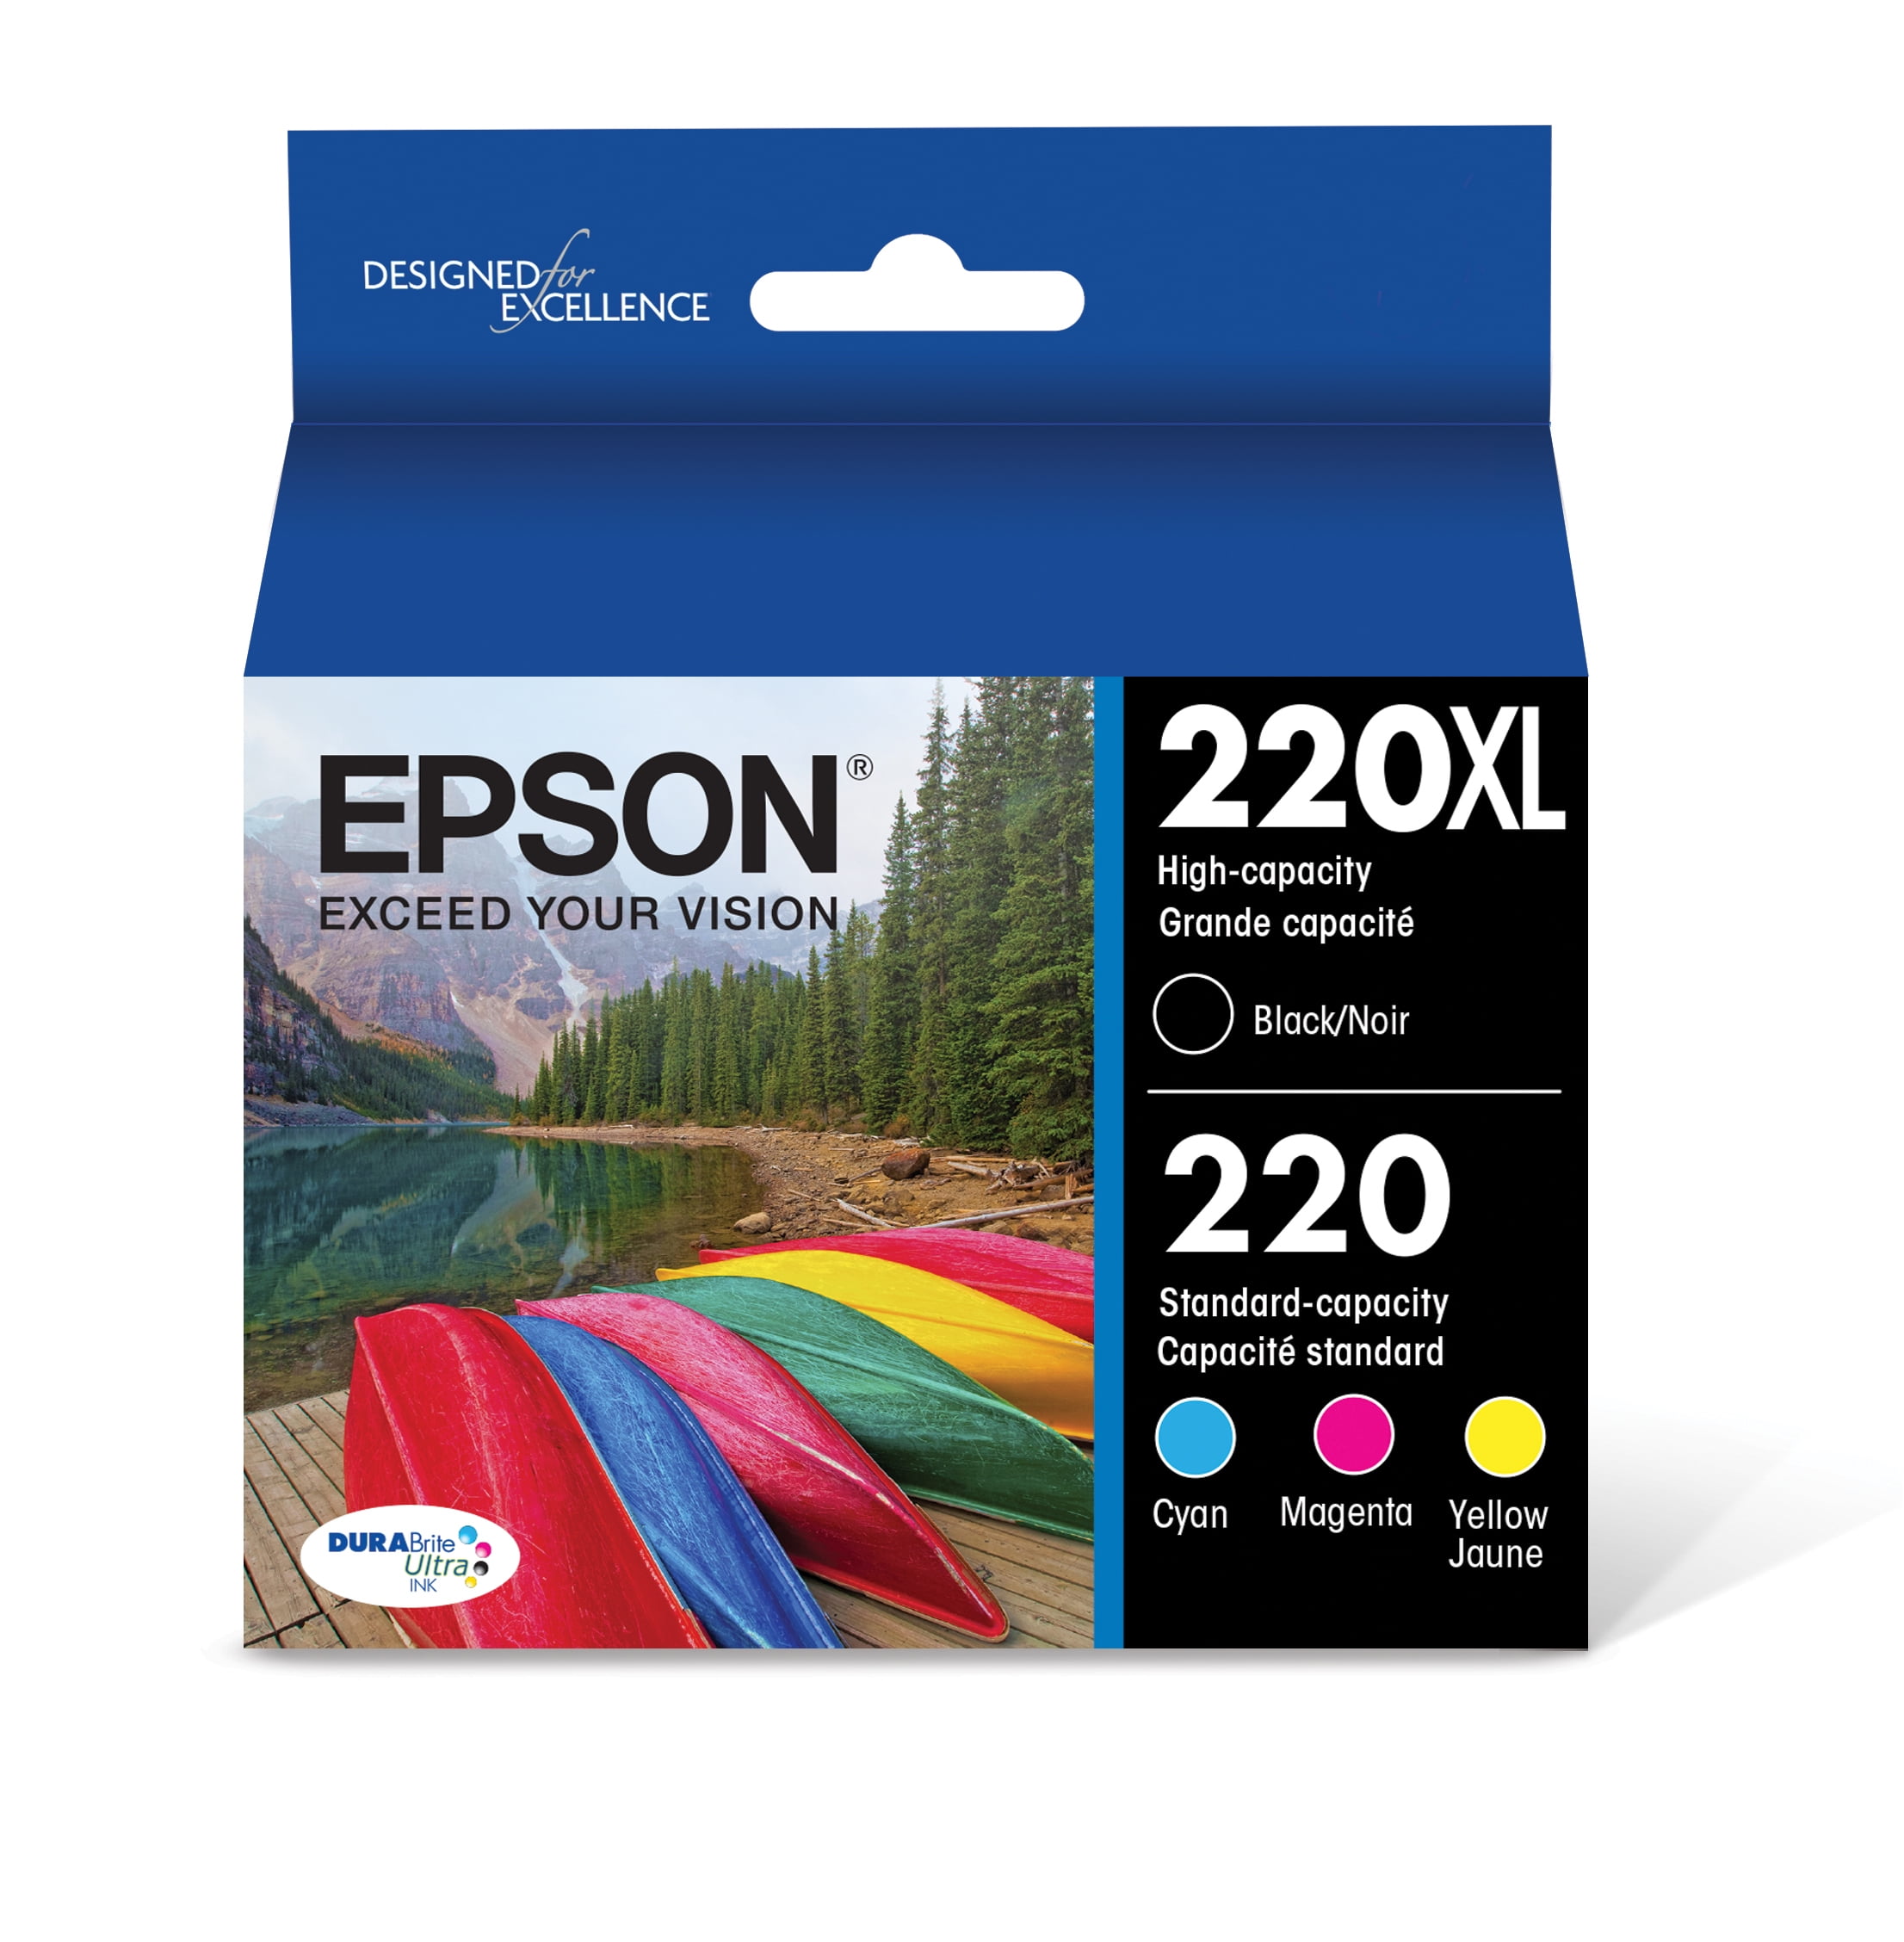 Epson Expression Home XP-2100 - Sun Valley Systems